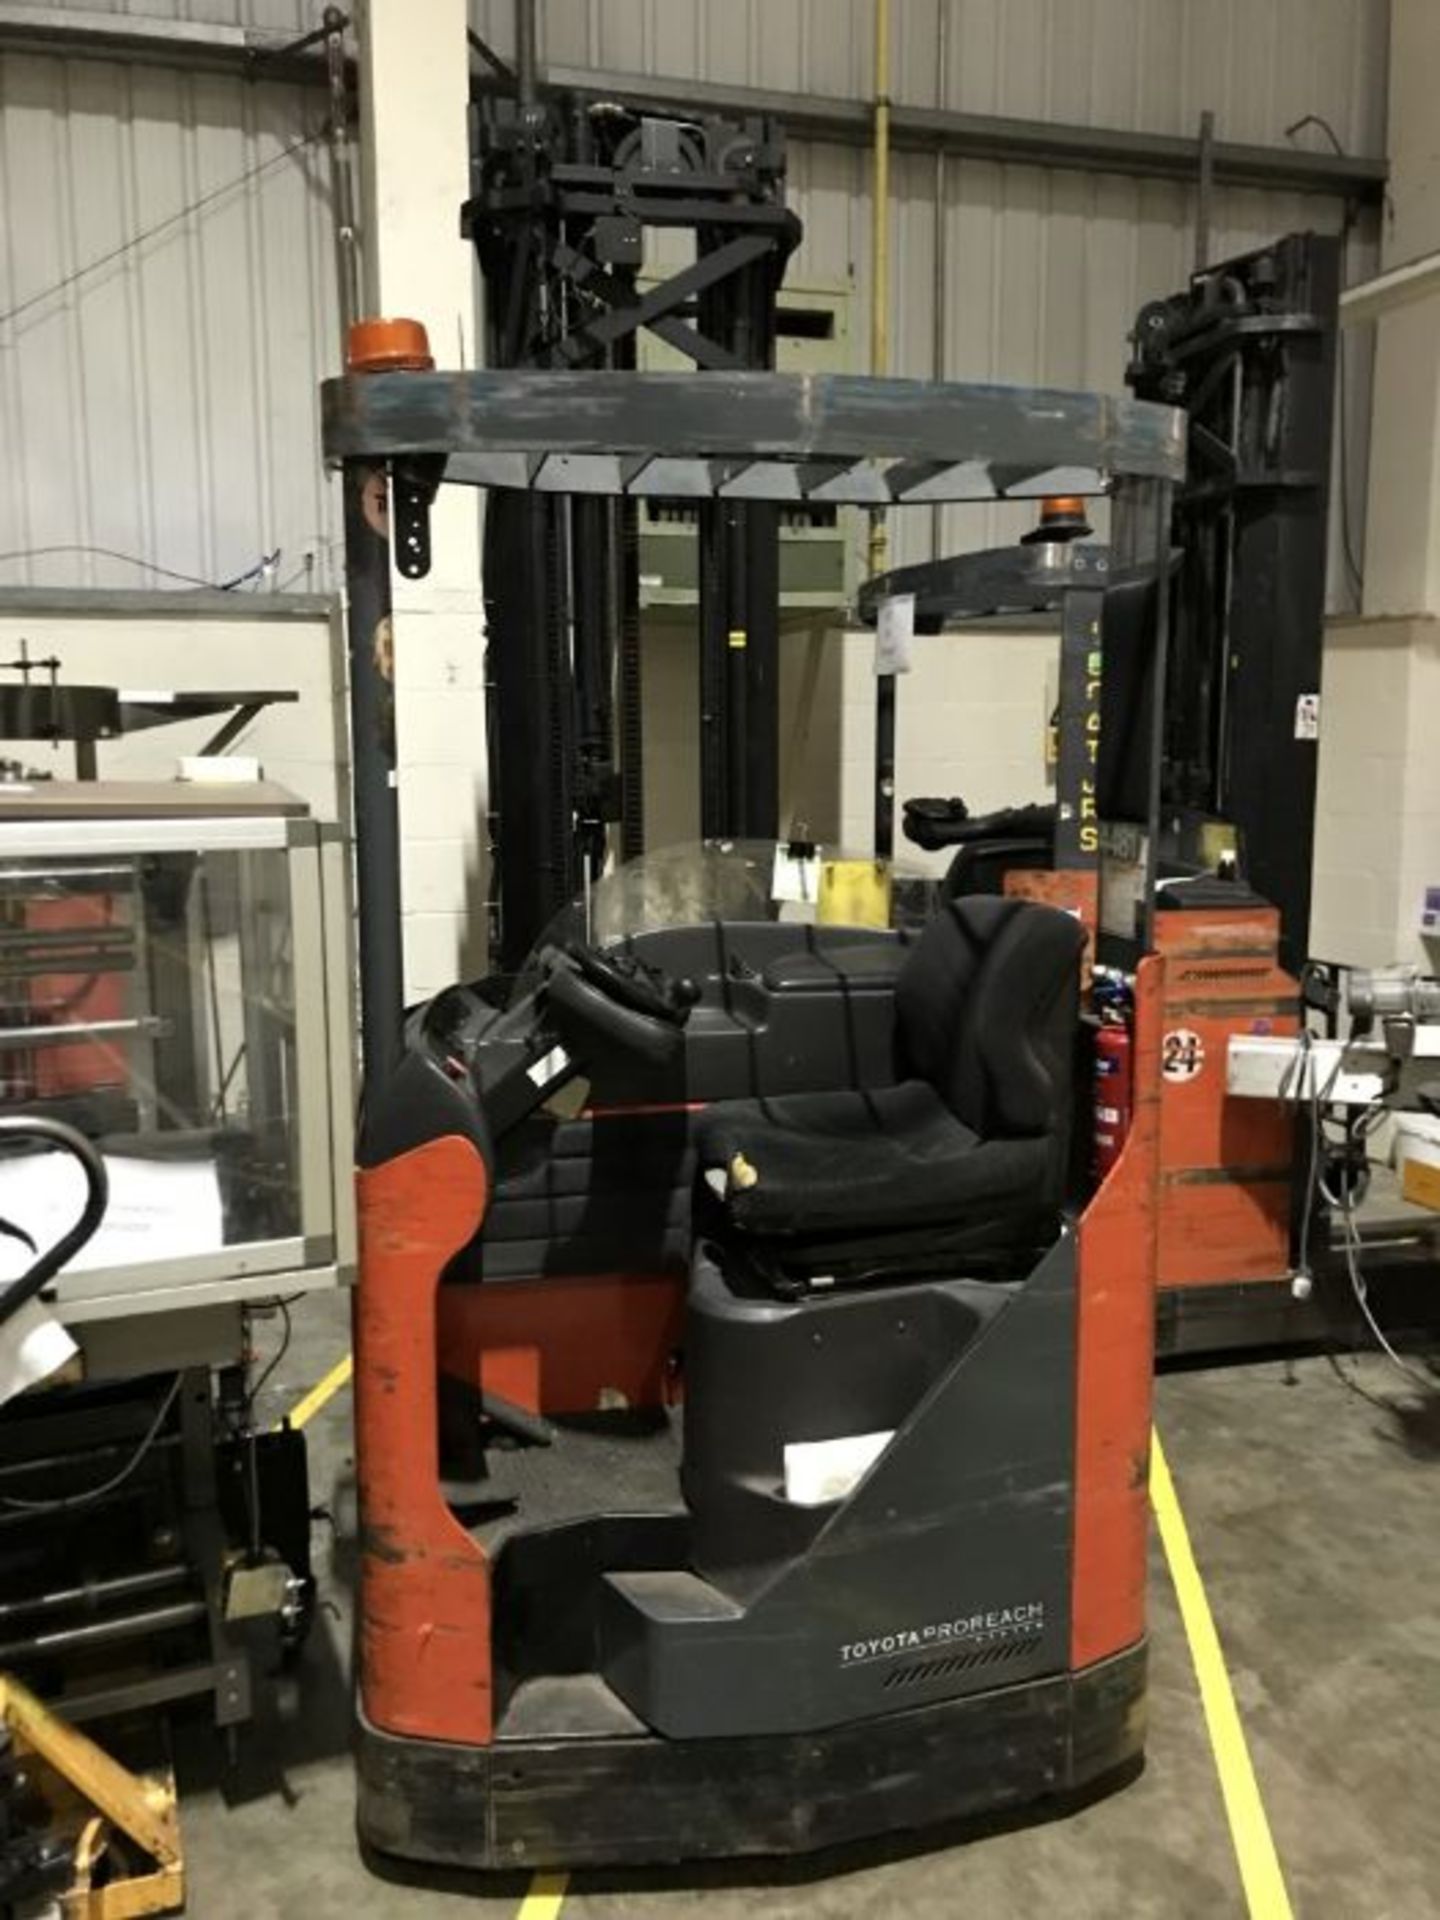 Toyota 7FBRE16-2 reach stacker truck - Image 2 of 6